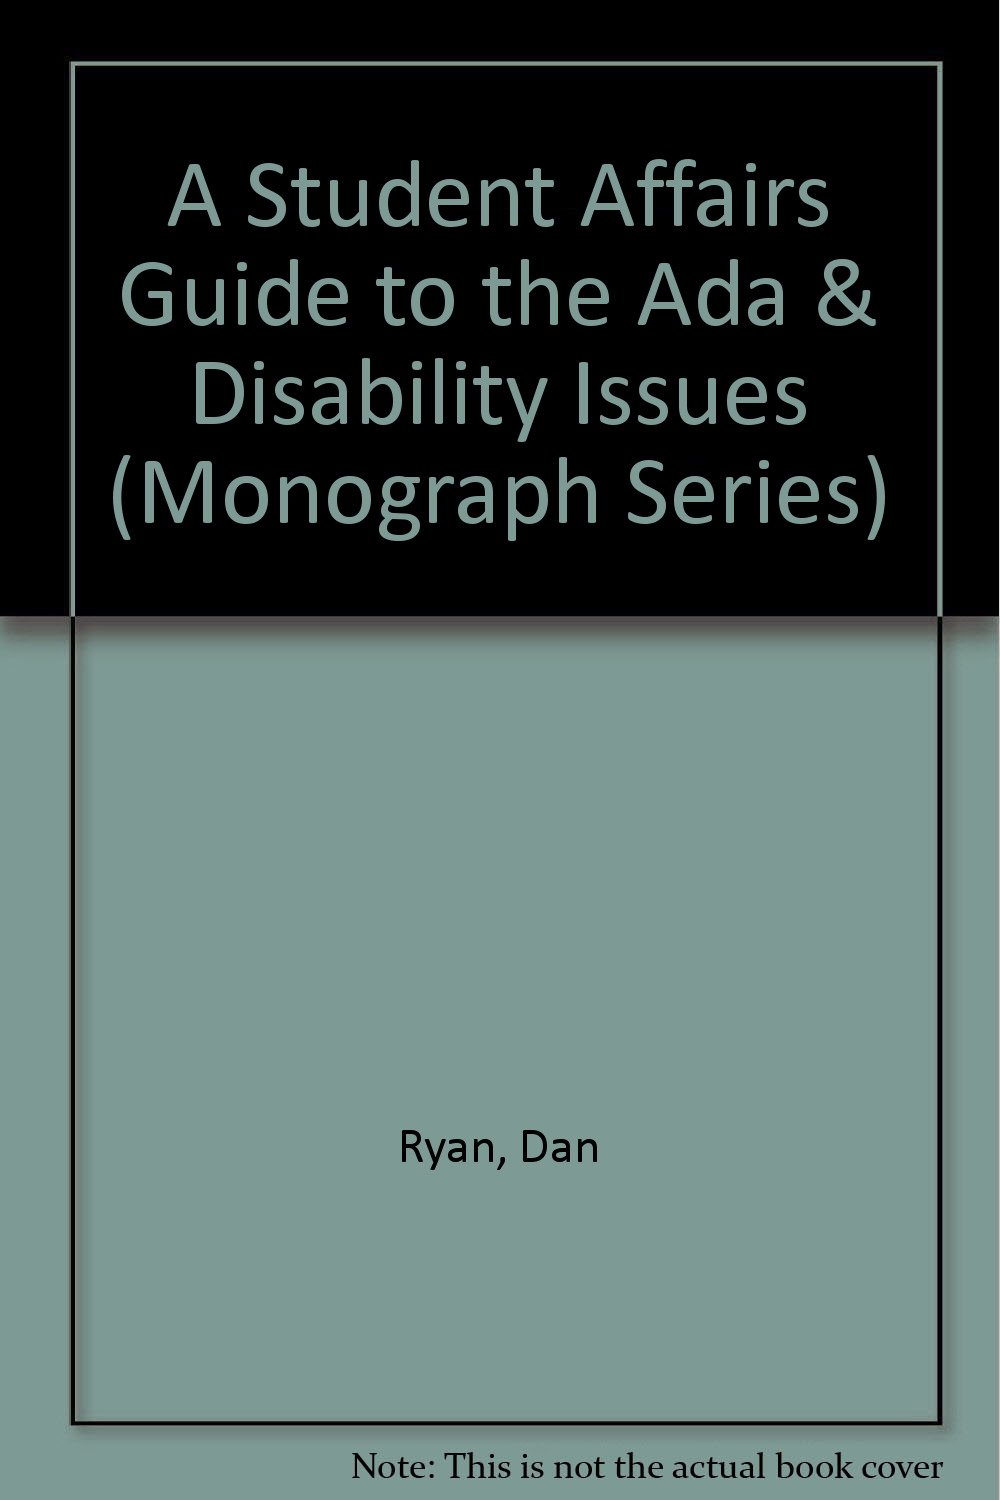 Dan Ryan A student affairs guide to the ada and disability issues 